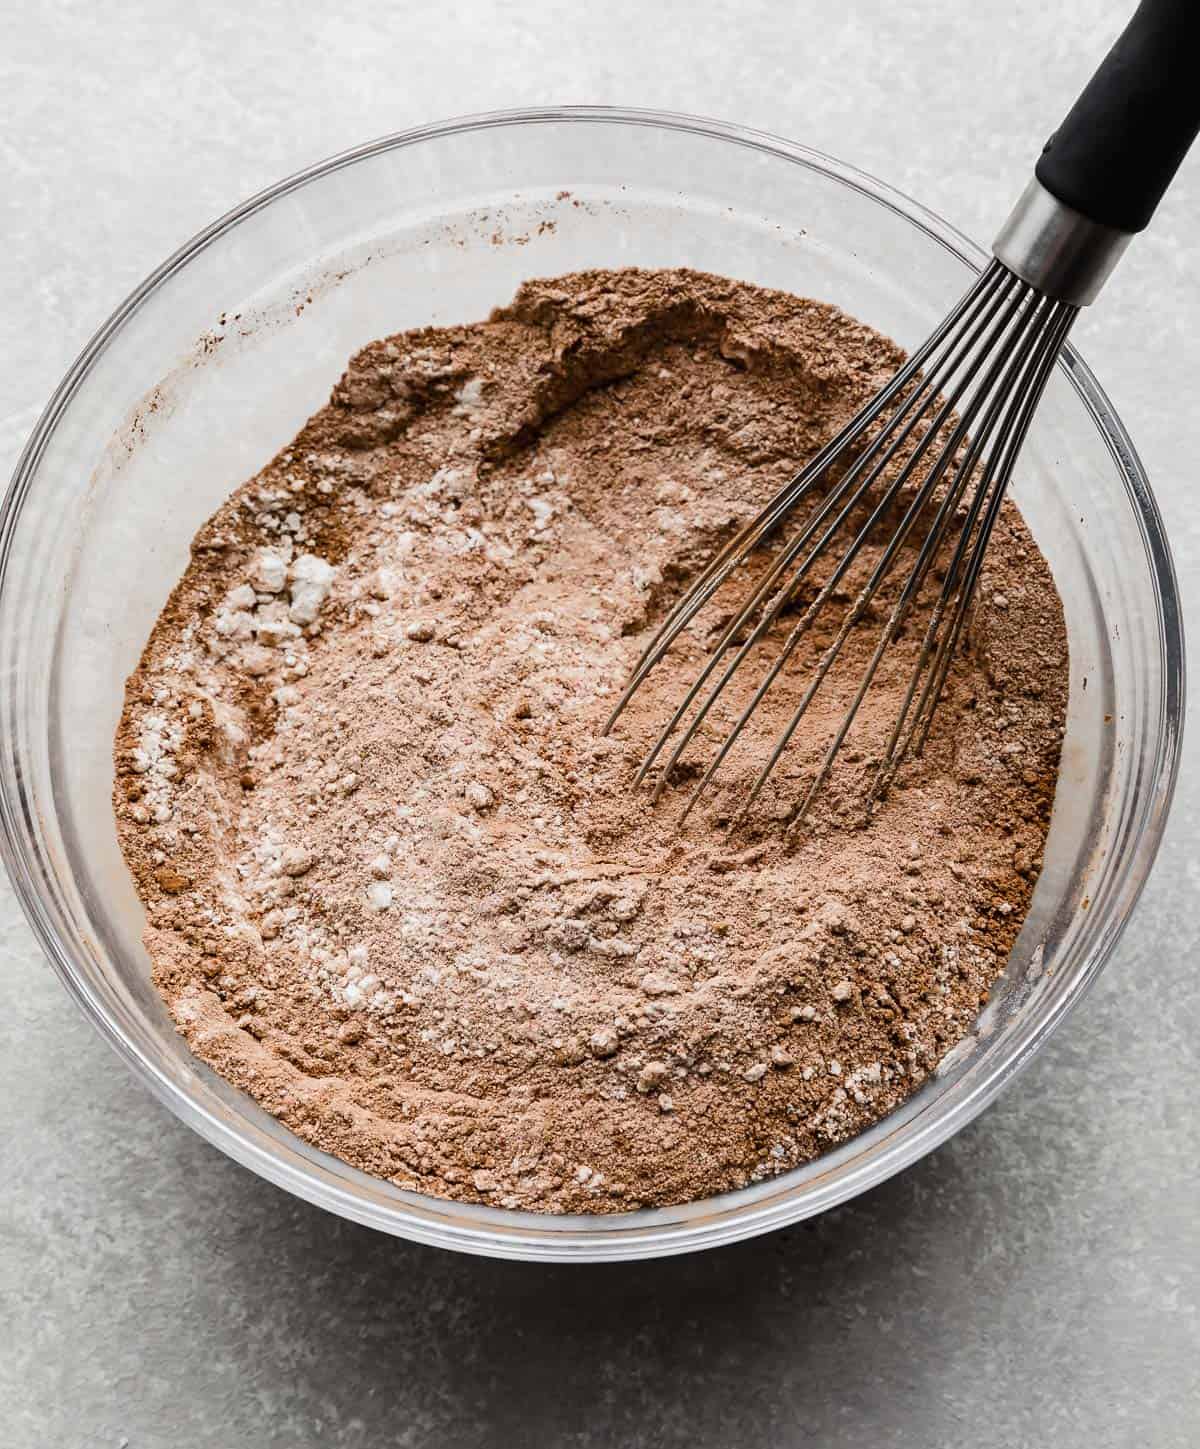 A whisk stirring brown dry ingredients in a glass bowl.